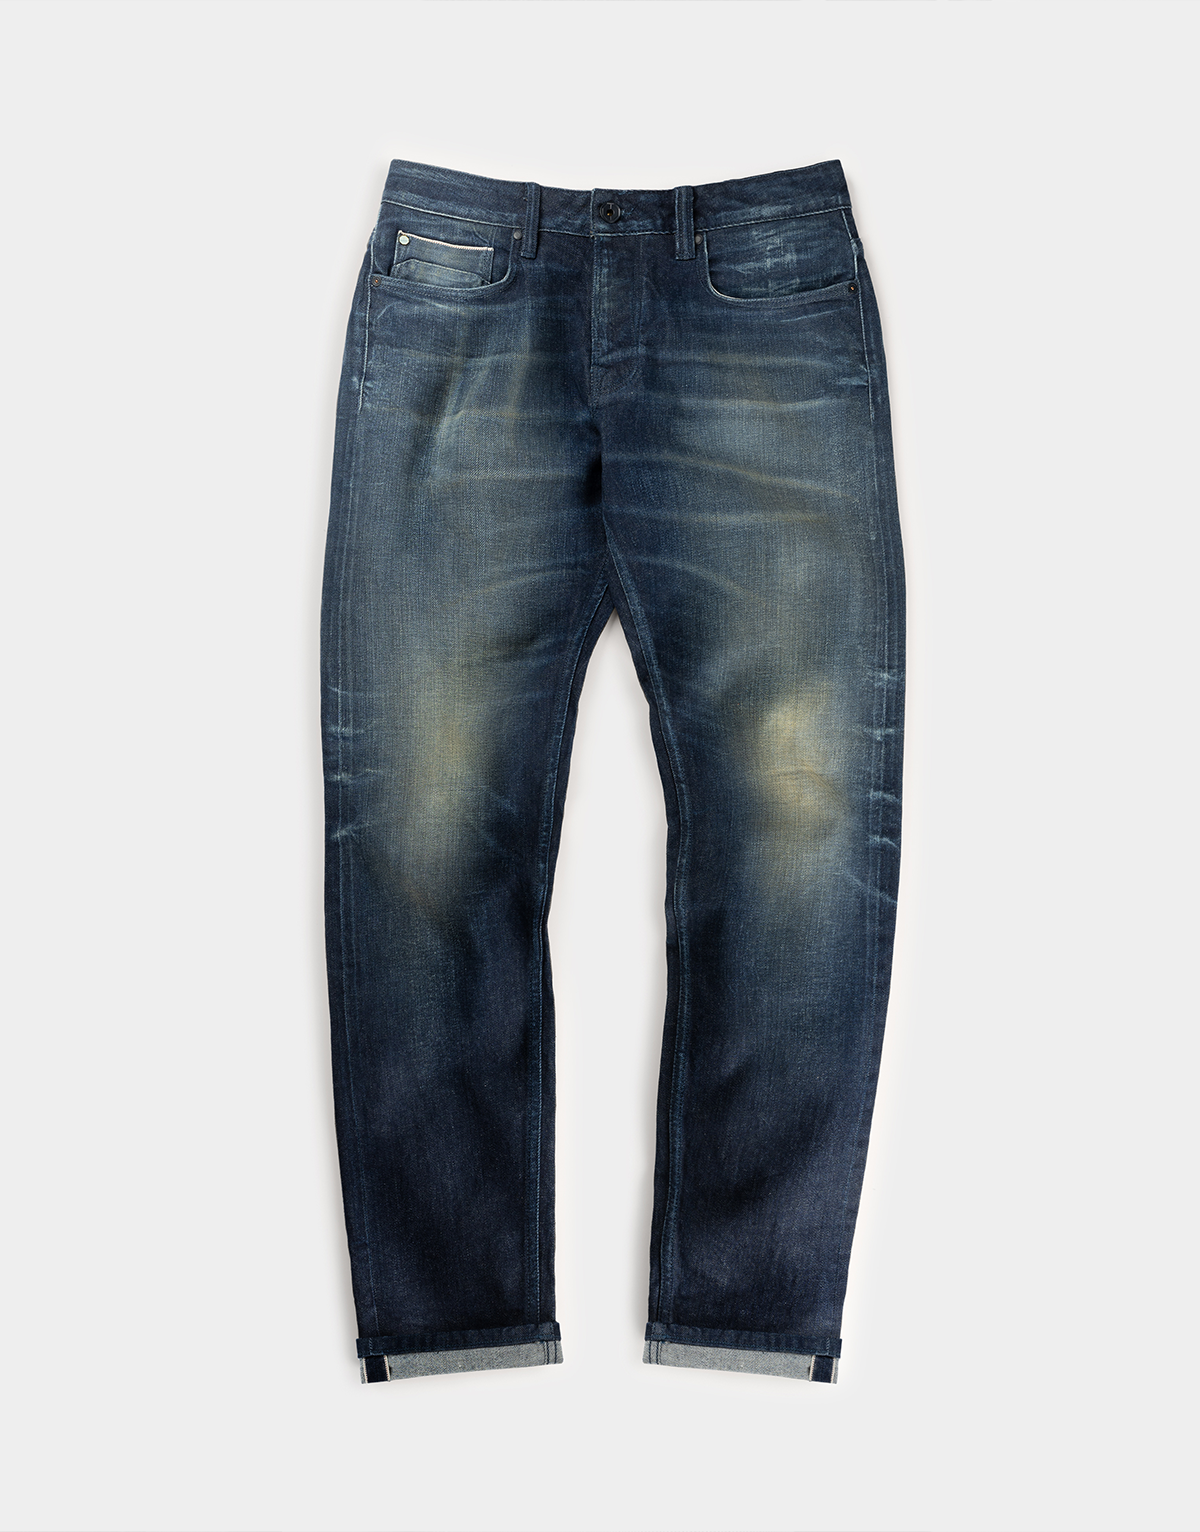 Introducing: Our Selvedge Denim